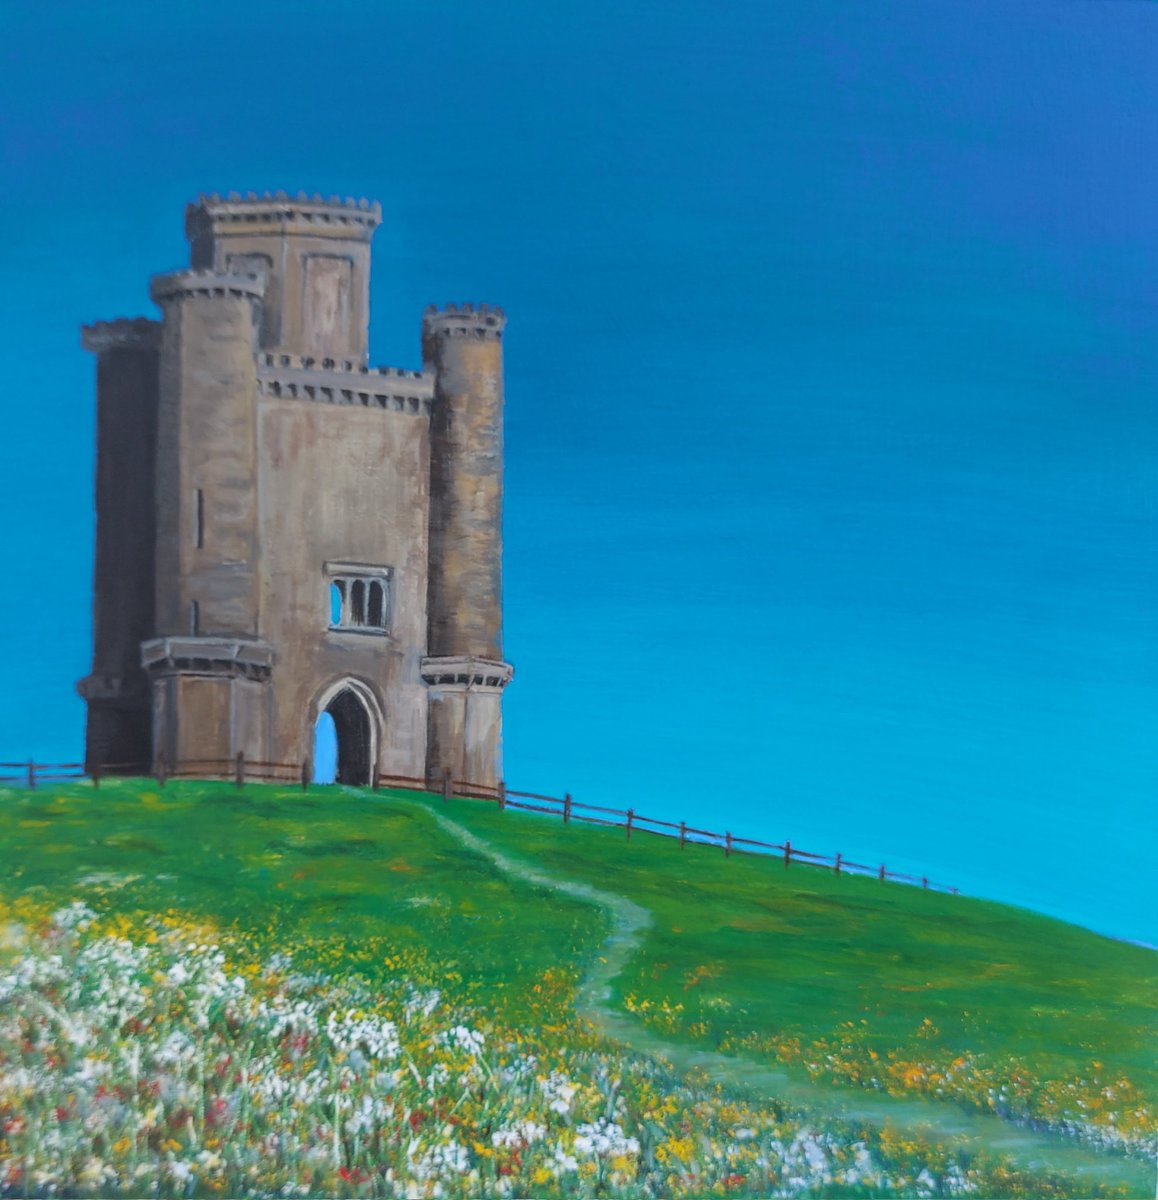 Paxton's Tower
#welshart #Carmarthenshire